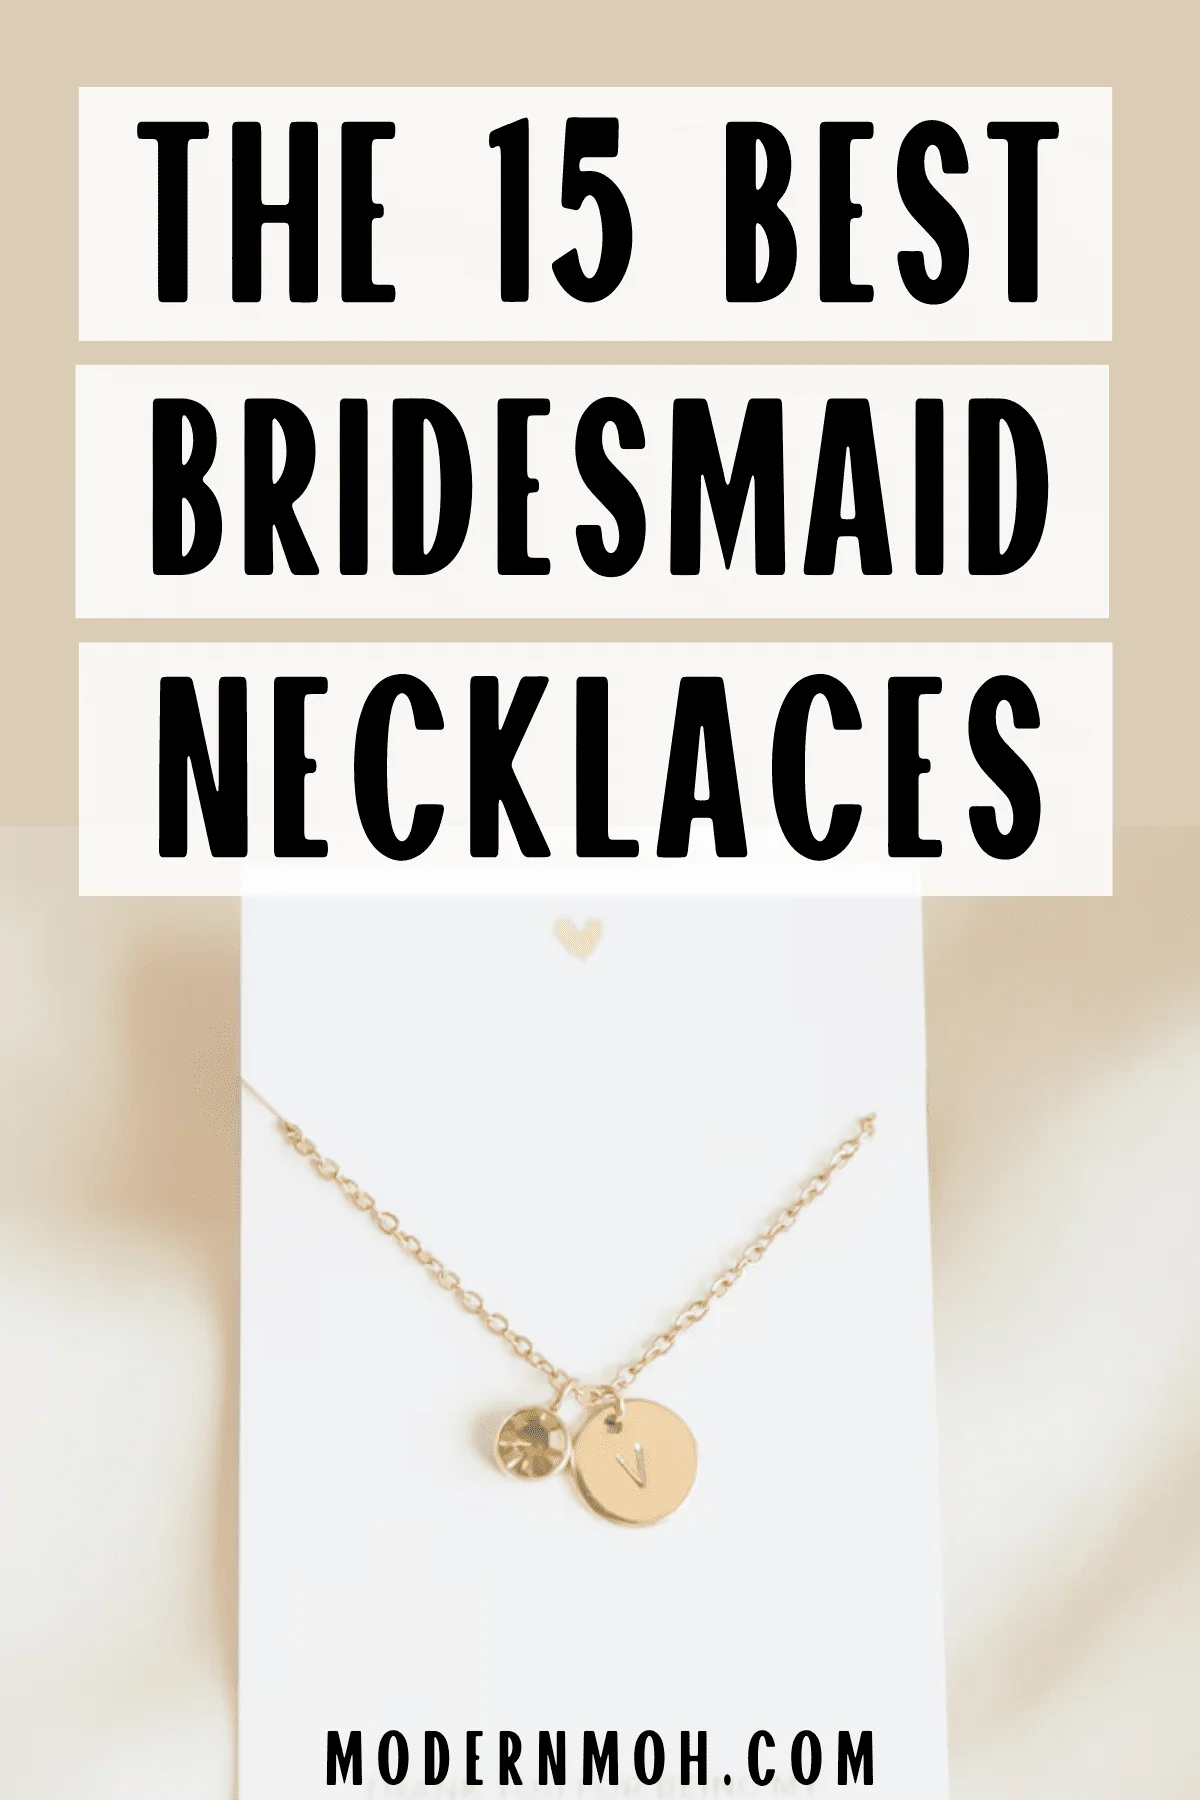 15 Bridesmaid Necklaces to Gift Your Girls